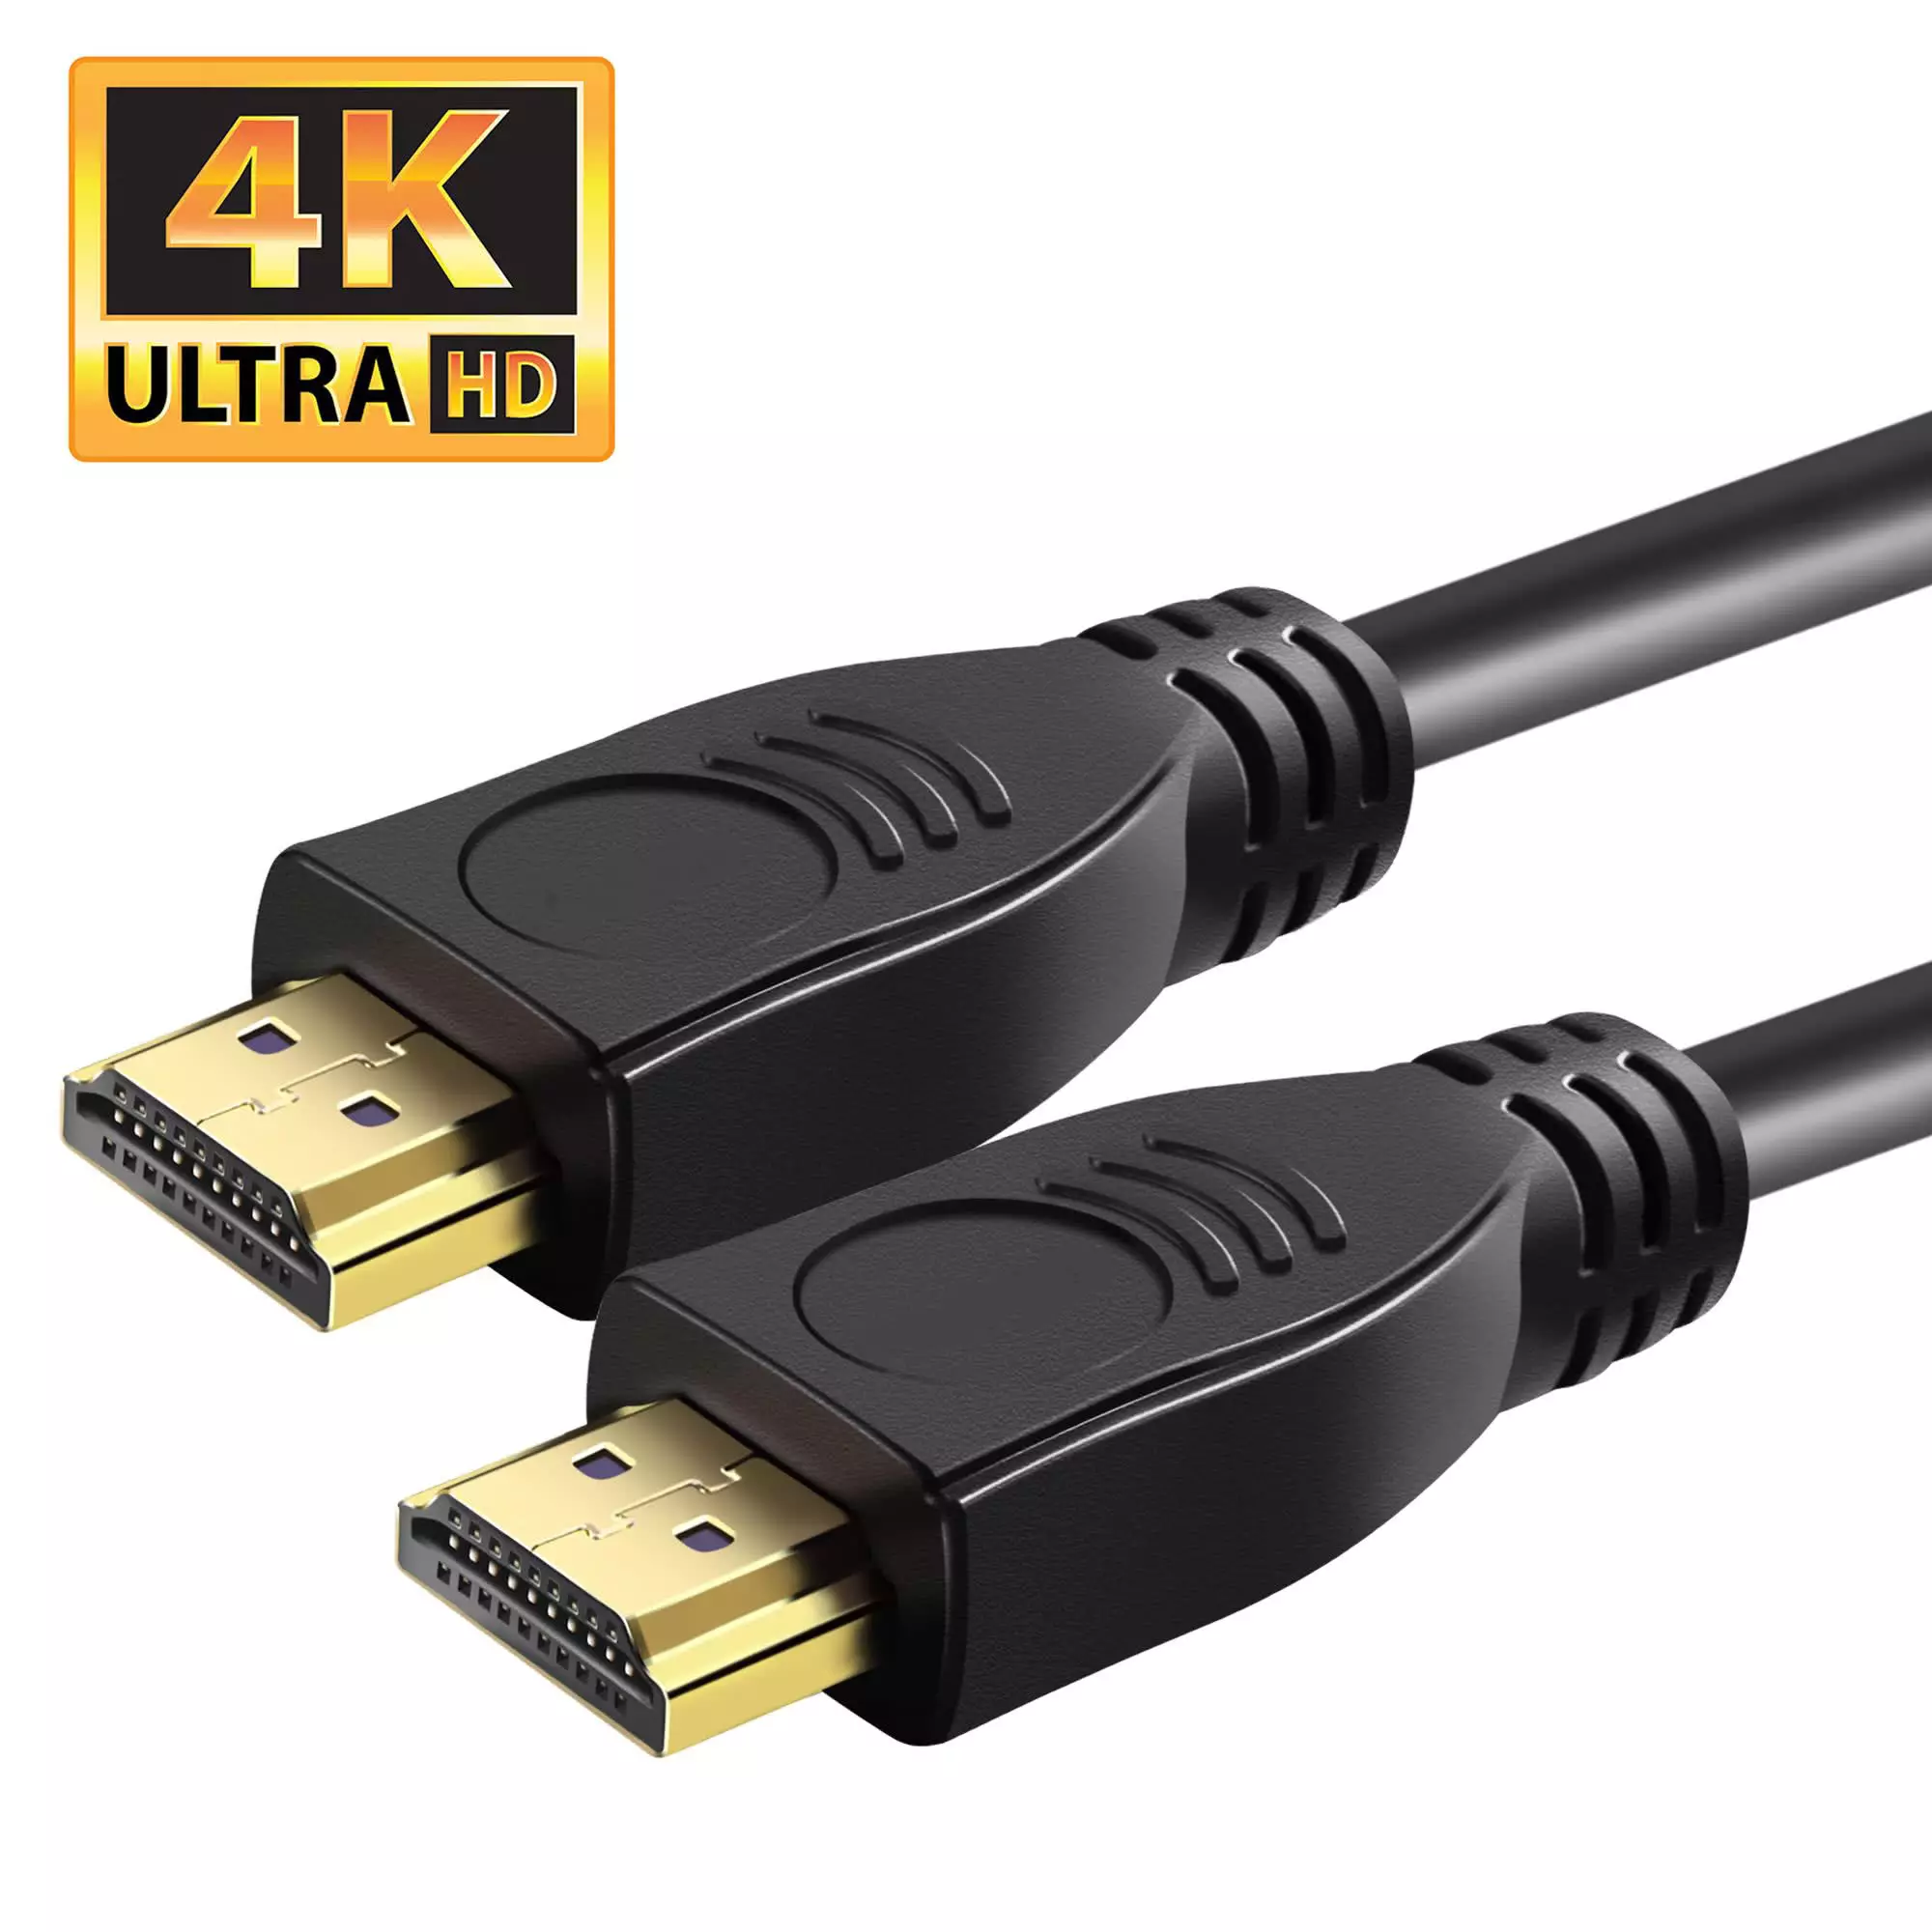 3 Meter 4k 144hz With HDR Support HDMI Cable V2.0